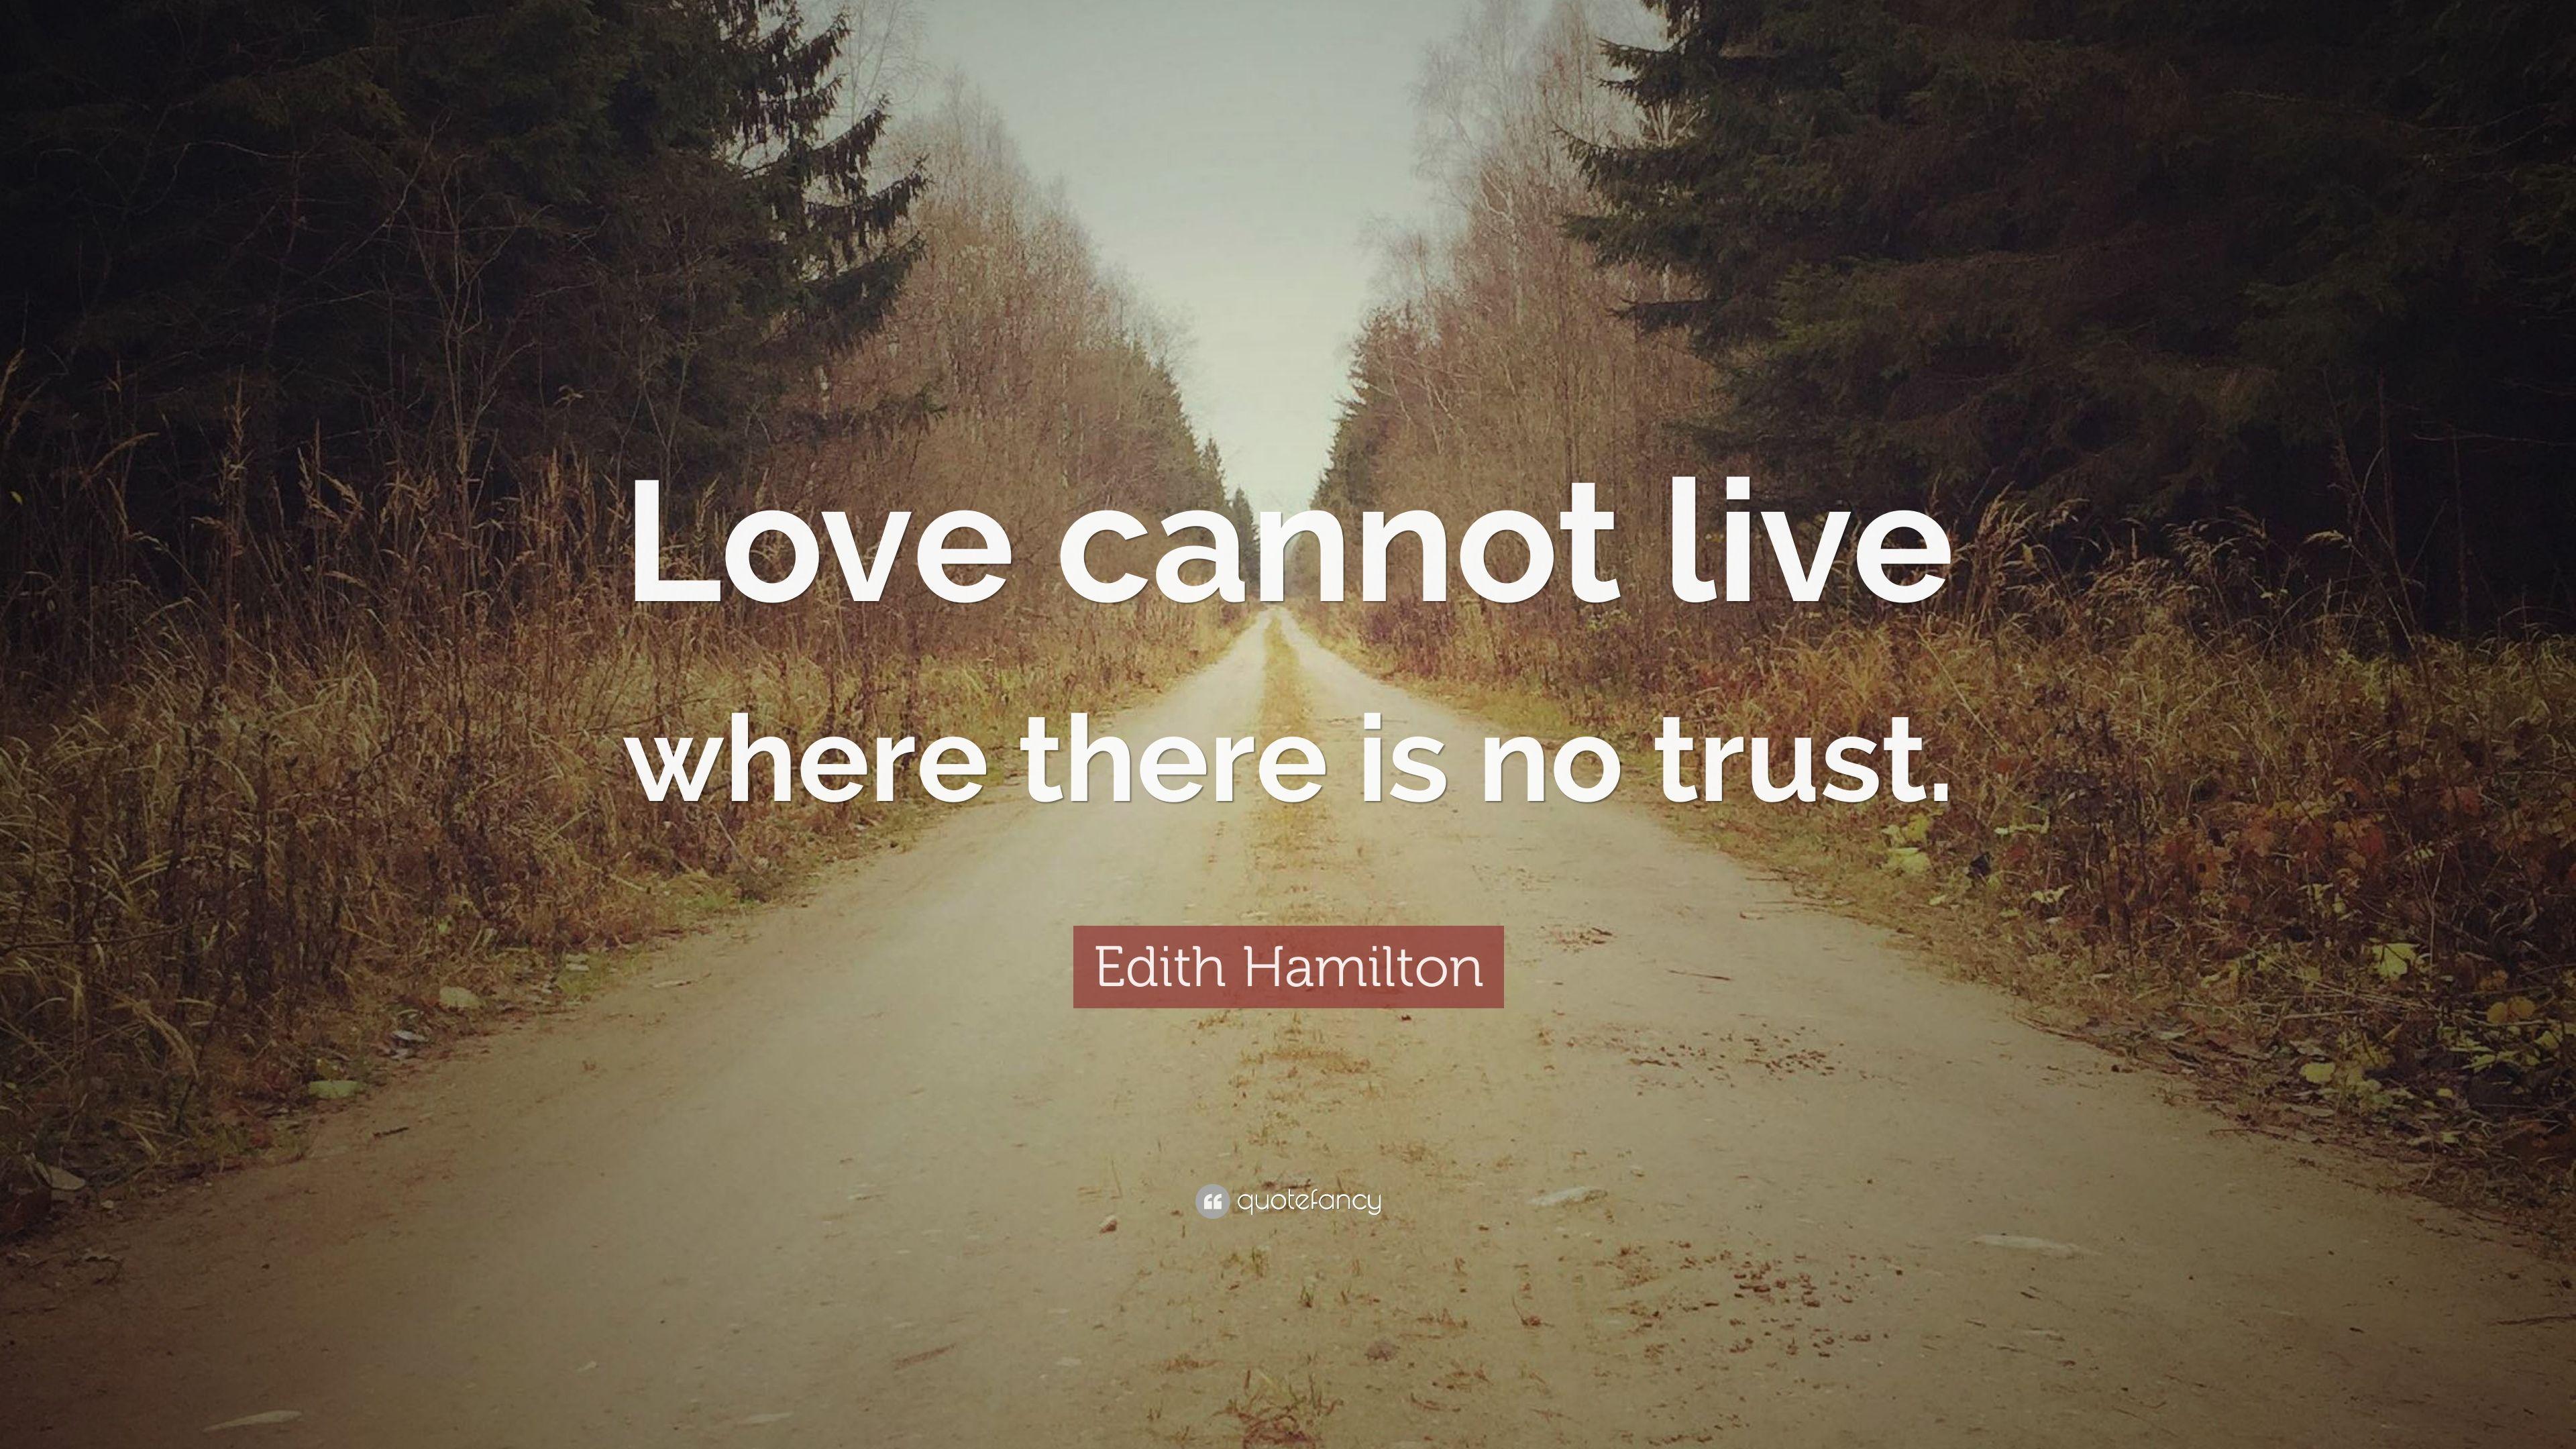 Edith Hamilton Quote: “Love cannot live where there is no trust